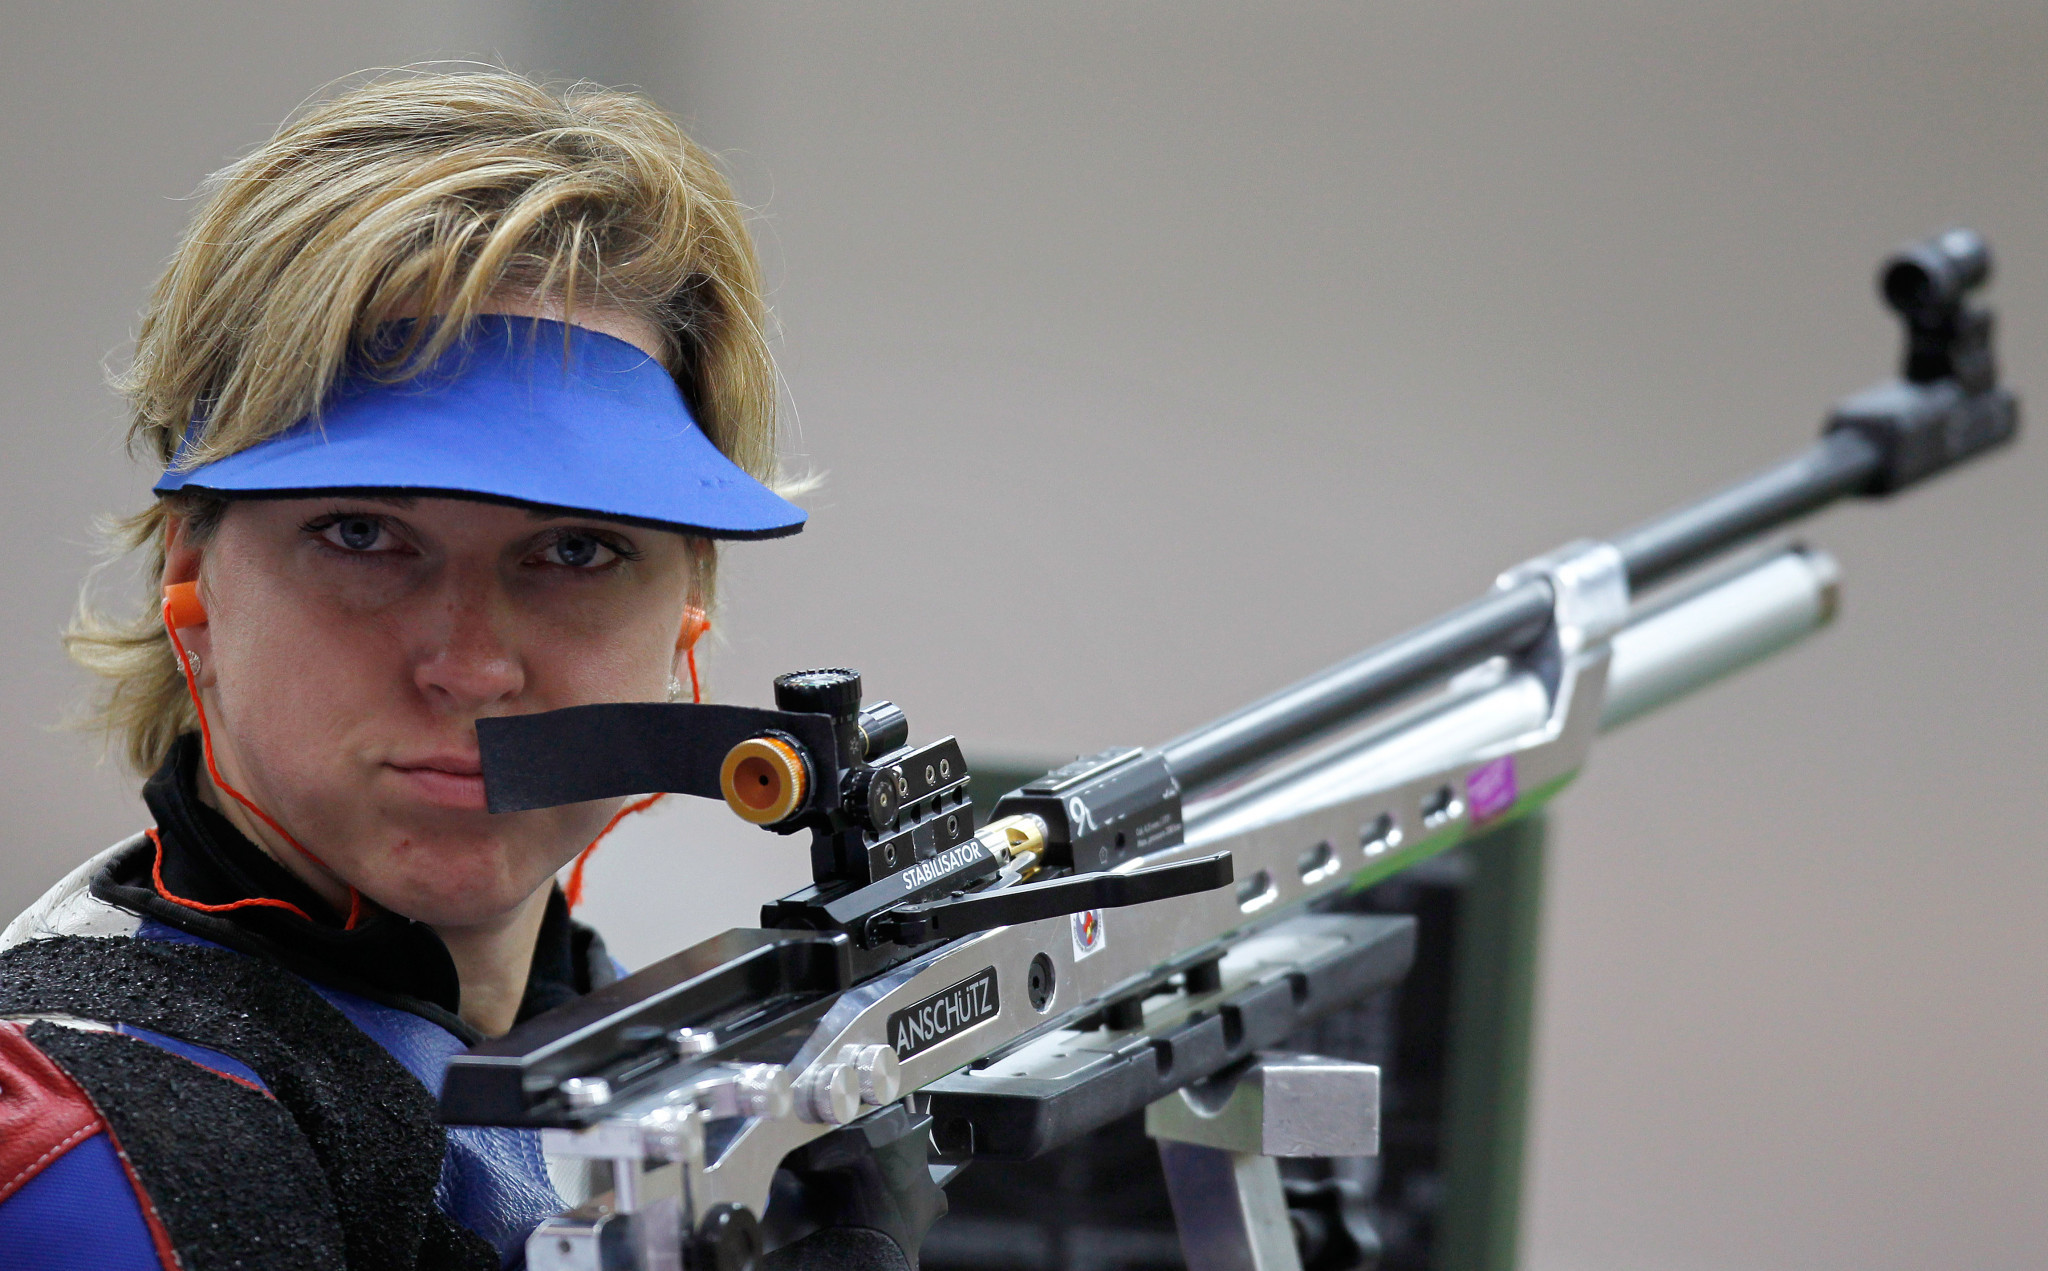 Slovakia's Veronika Vadovicova broke her own world record in winning gold in the R3 event at the World Shooting Para Sport Championships in Cheongju ©Getty Images  